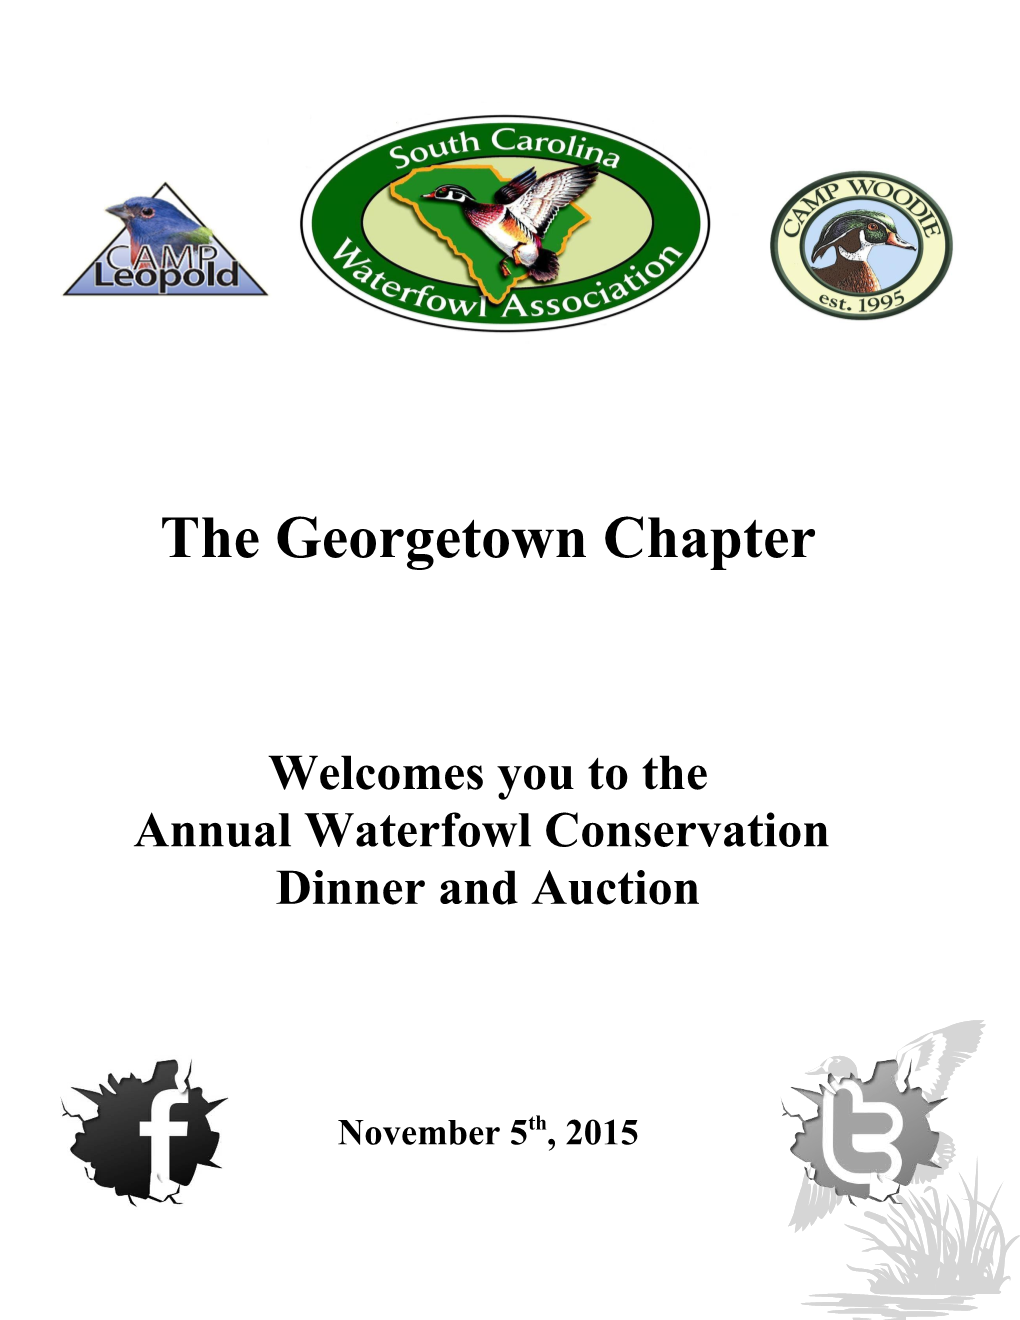 The Georgetown Chapter